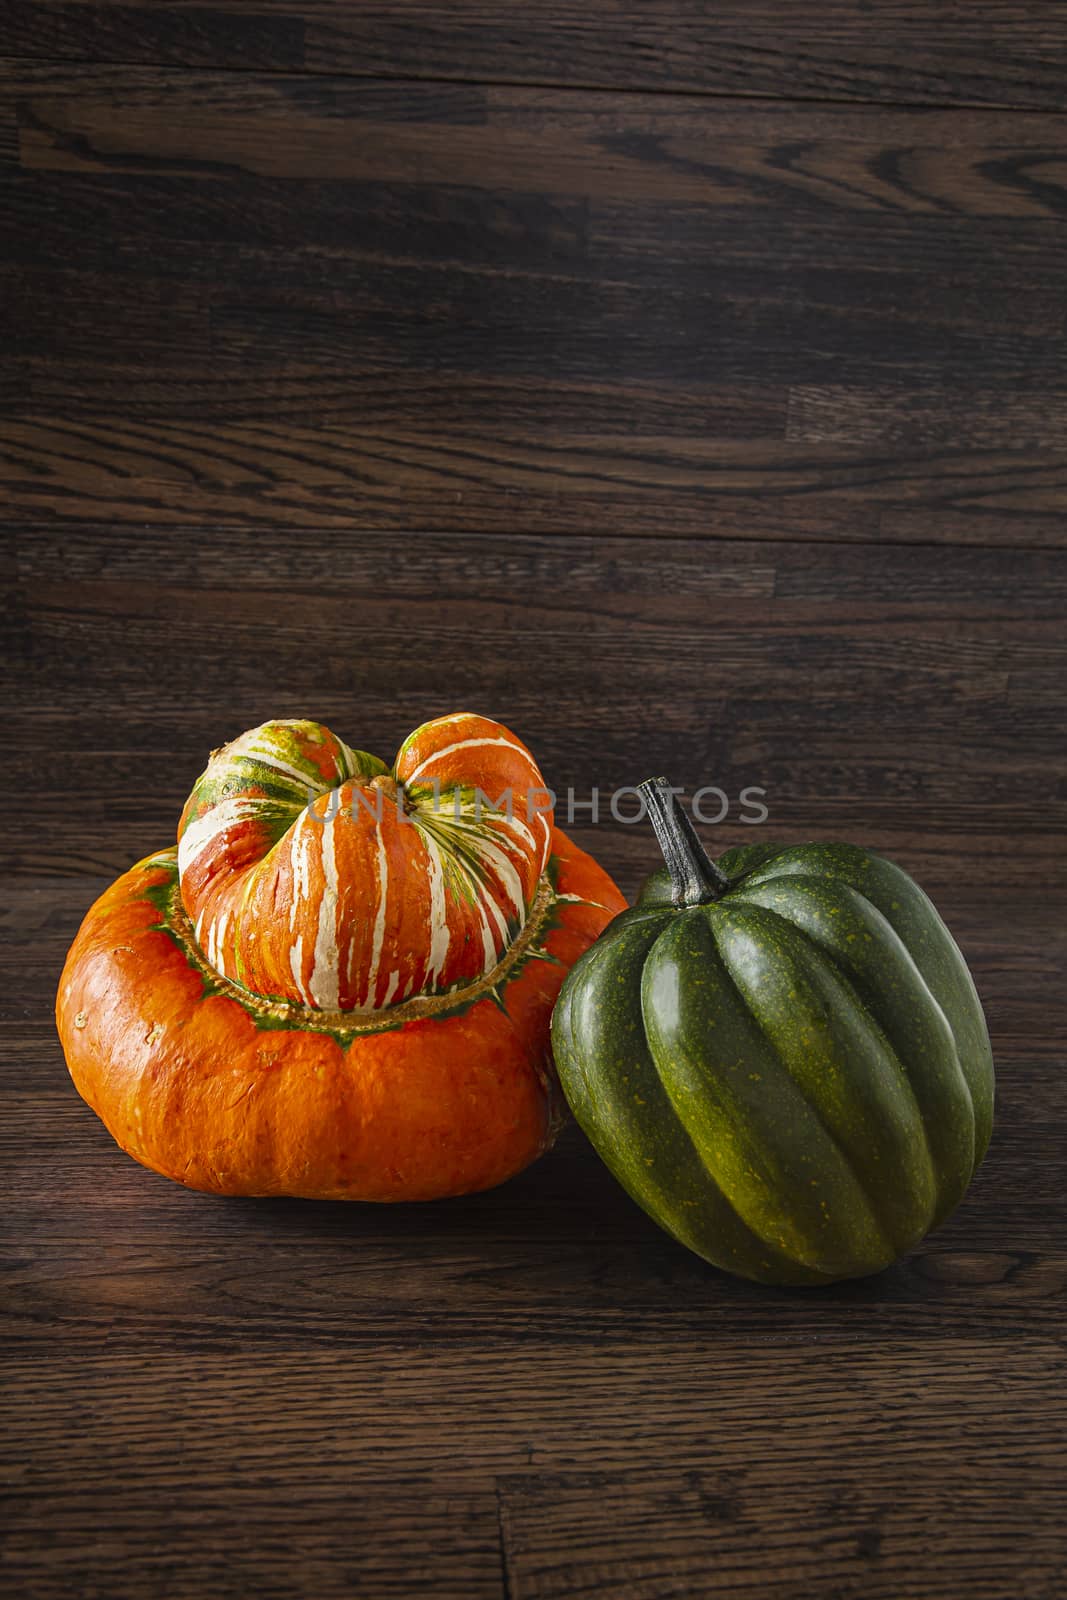 Turban and sweet dumbling squash  by mypstudio